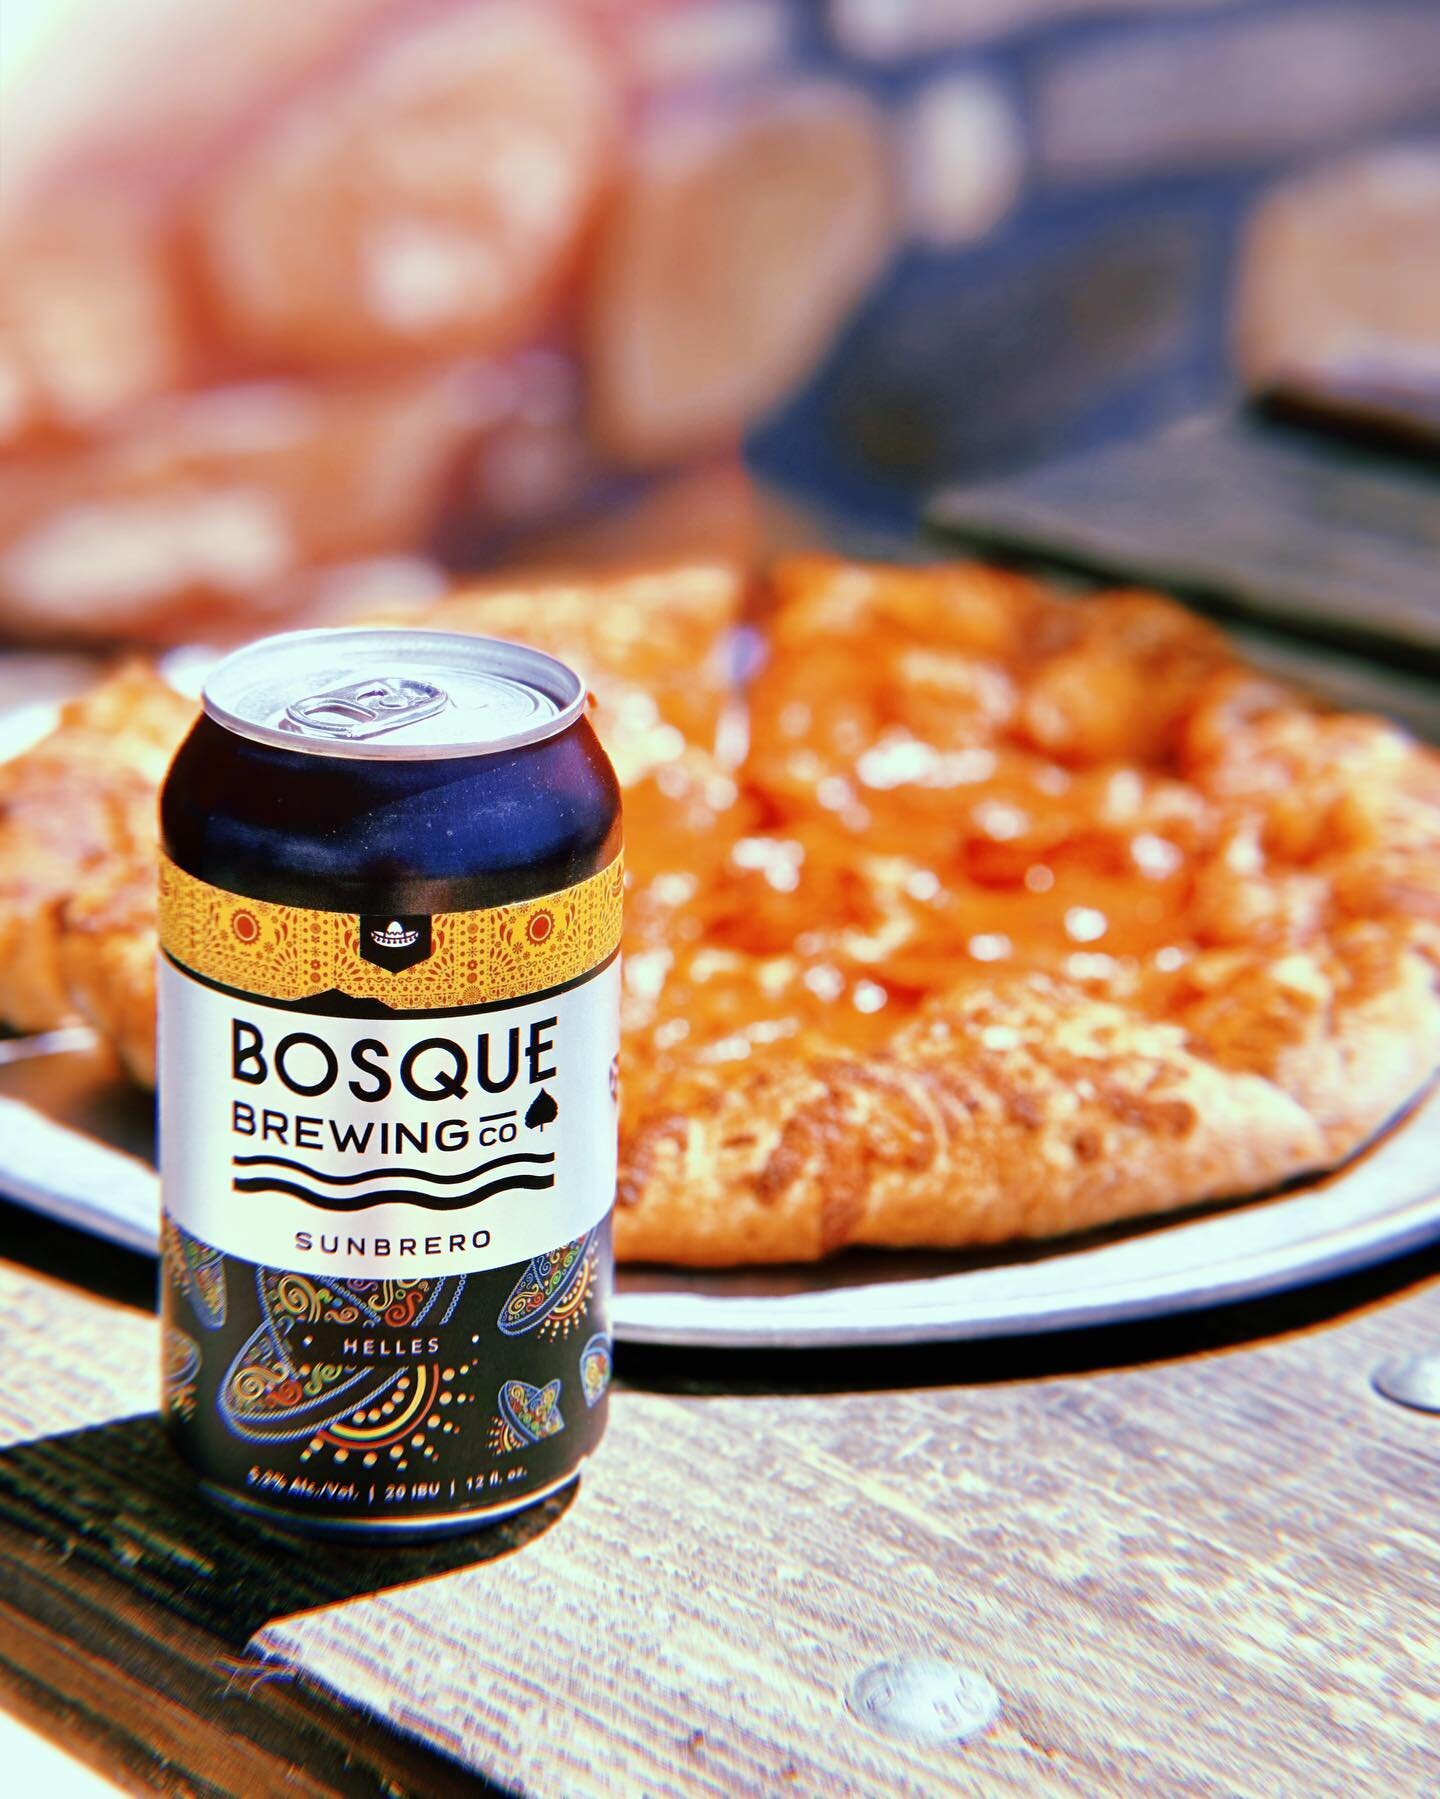 📢TODAY🚨
Sunbrero | Helles
5.2 % ABV| 20 IBU

It's Friday, and what better way to celebrate than with the newest drop from @bosquebrewingco? Introducing their latest addition, Sunbrero - a bright, traditional, malt-forward Helles perfect for a laid-